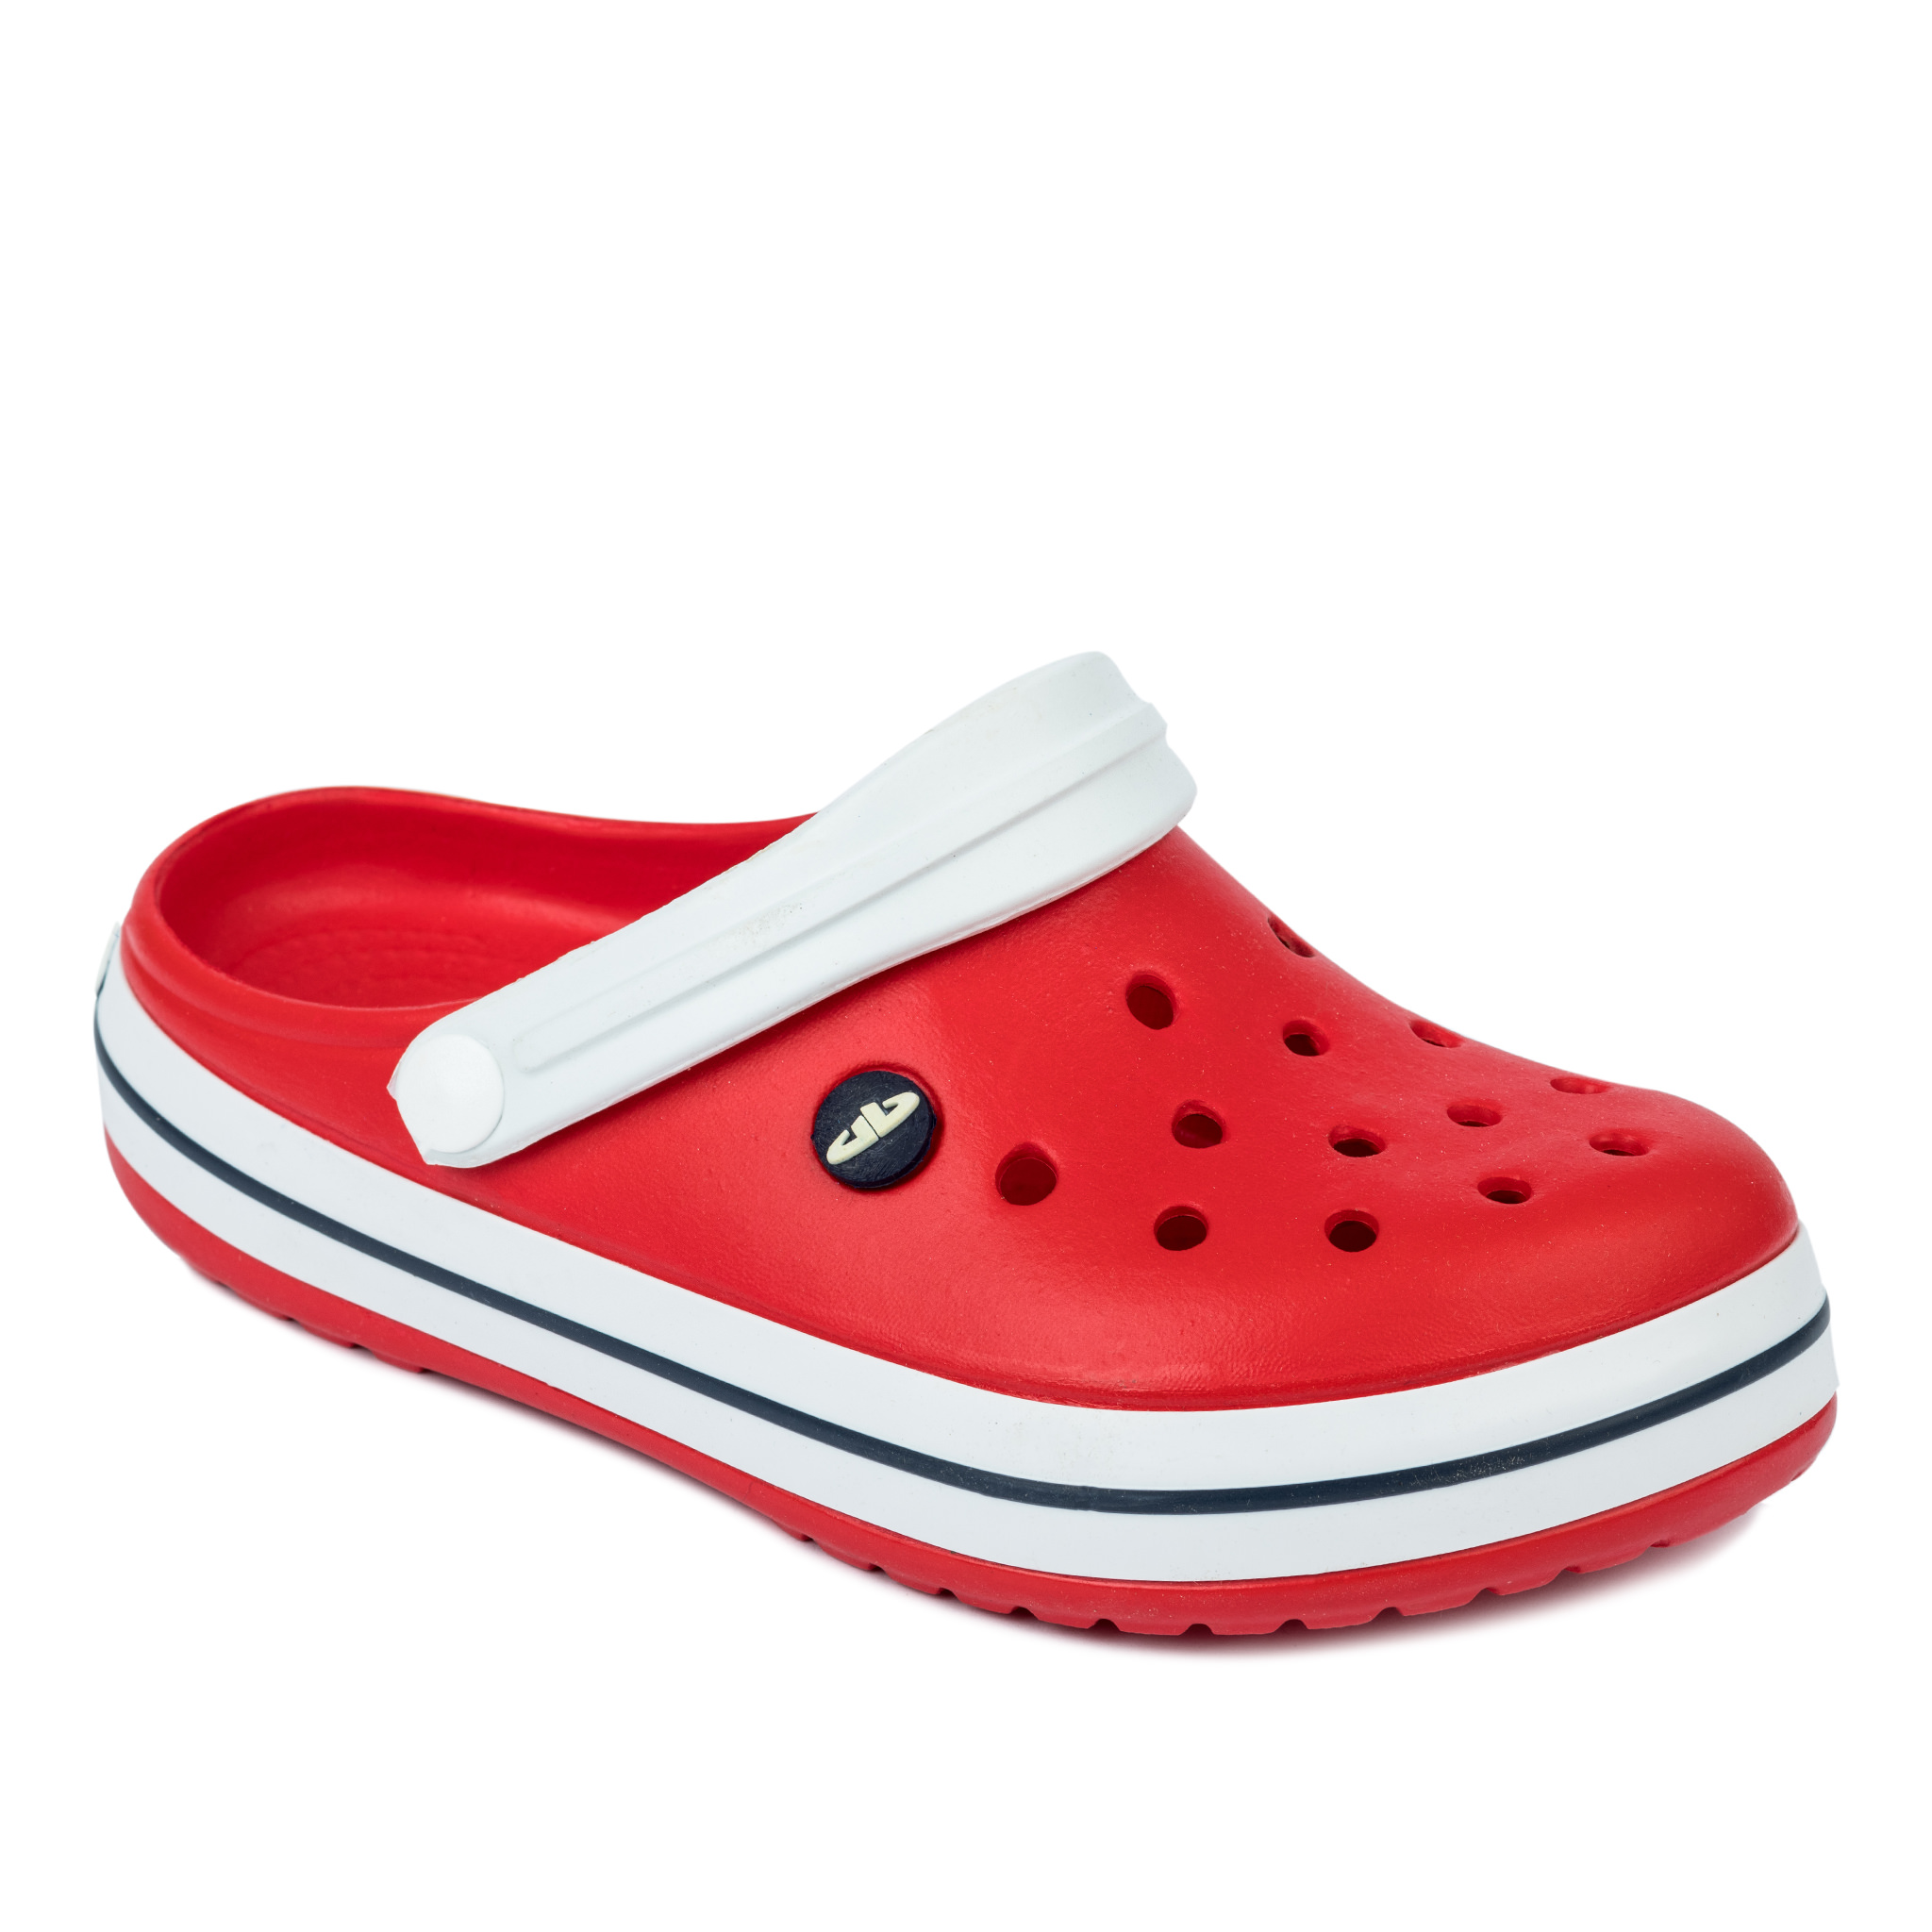 Rubber slippers  - RED